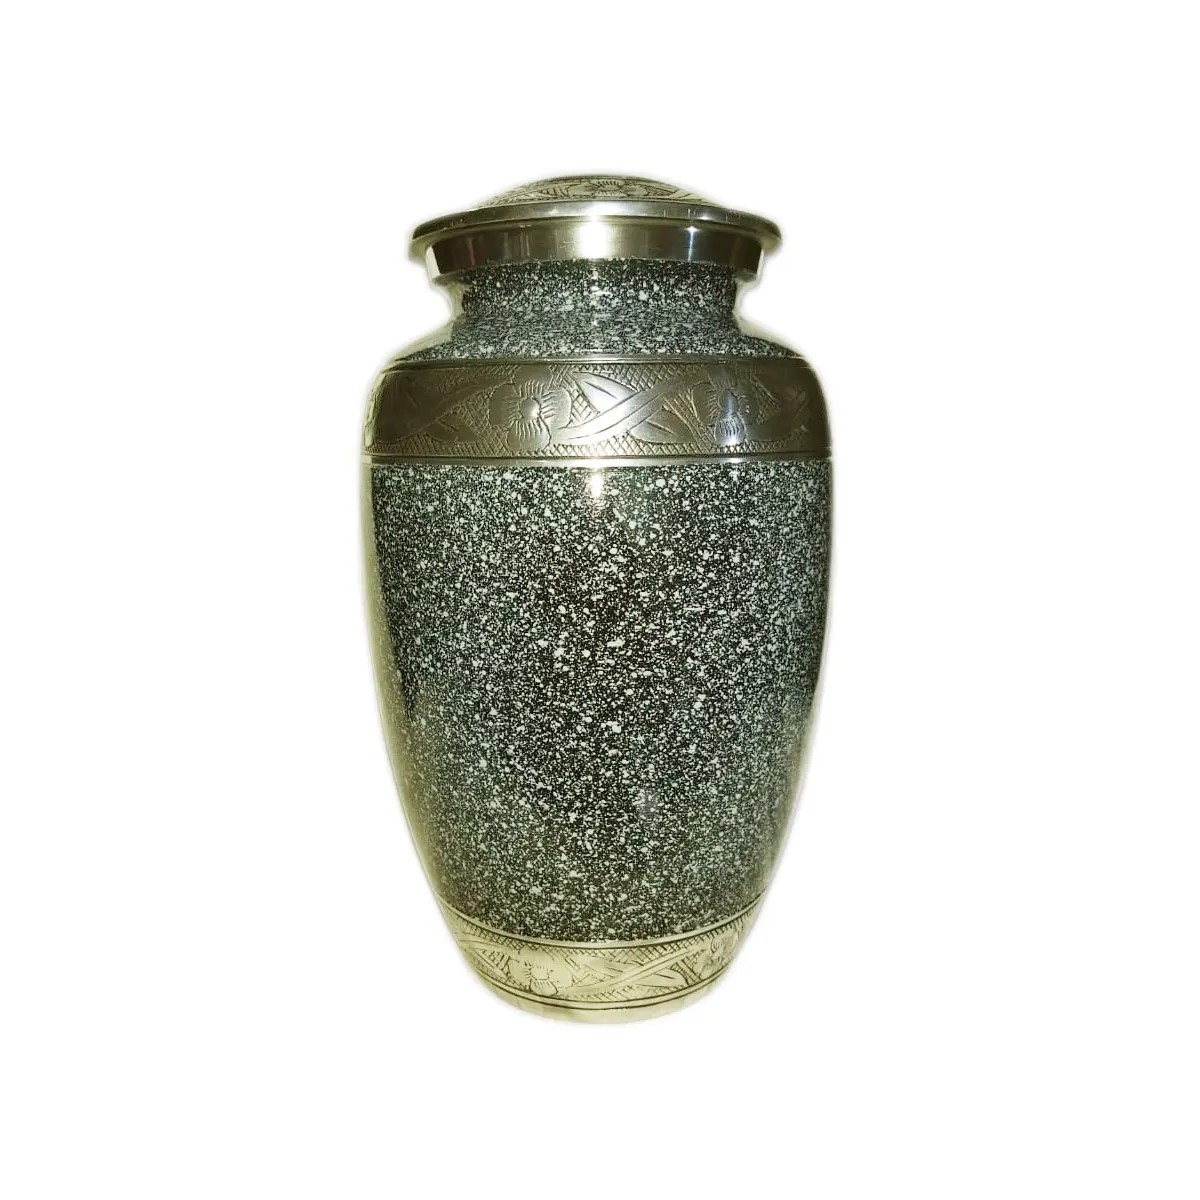 Best Selling Cremation Urn for Ashes for Adult Memorial White Funeral Burial Urns Made from Brass for Human Funeral Ashes